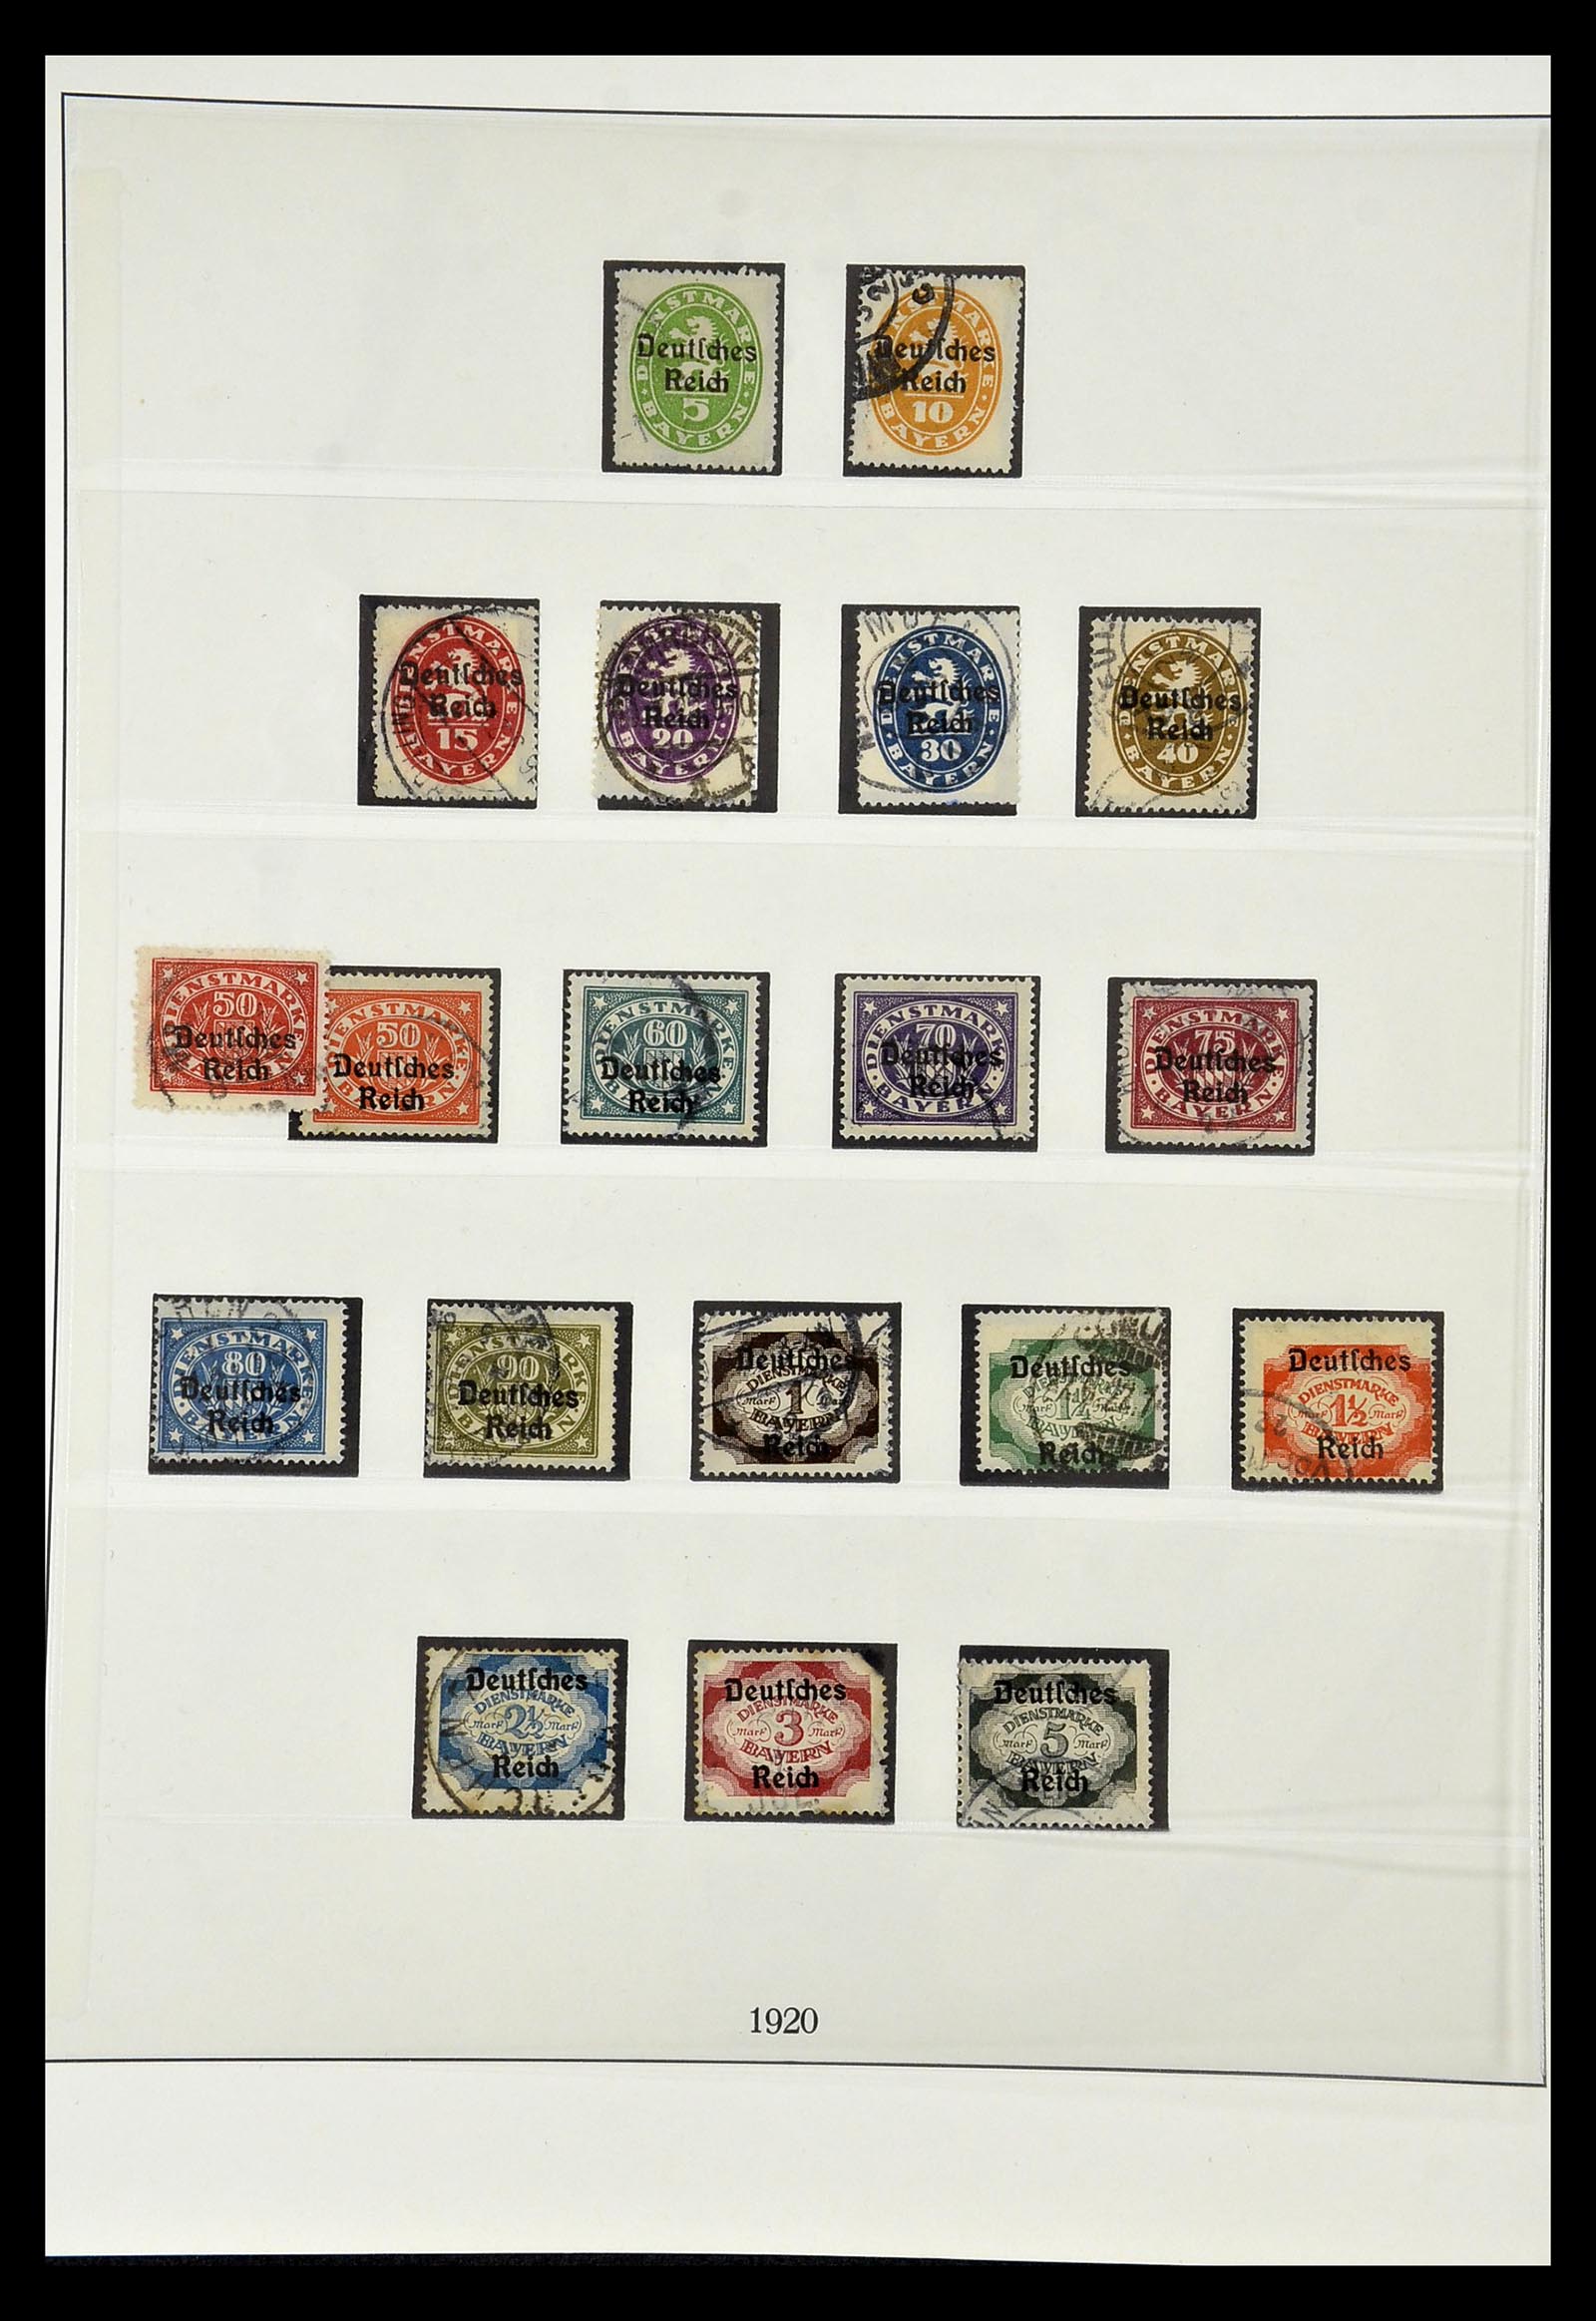 35016 004 - Stamp Collection 35016 Duitse Rijk service stamps 1903-1942.